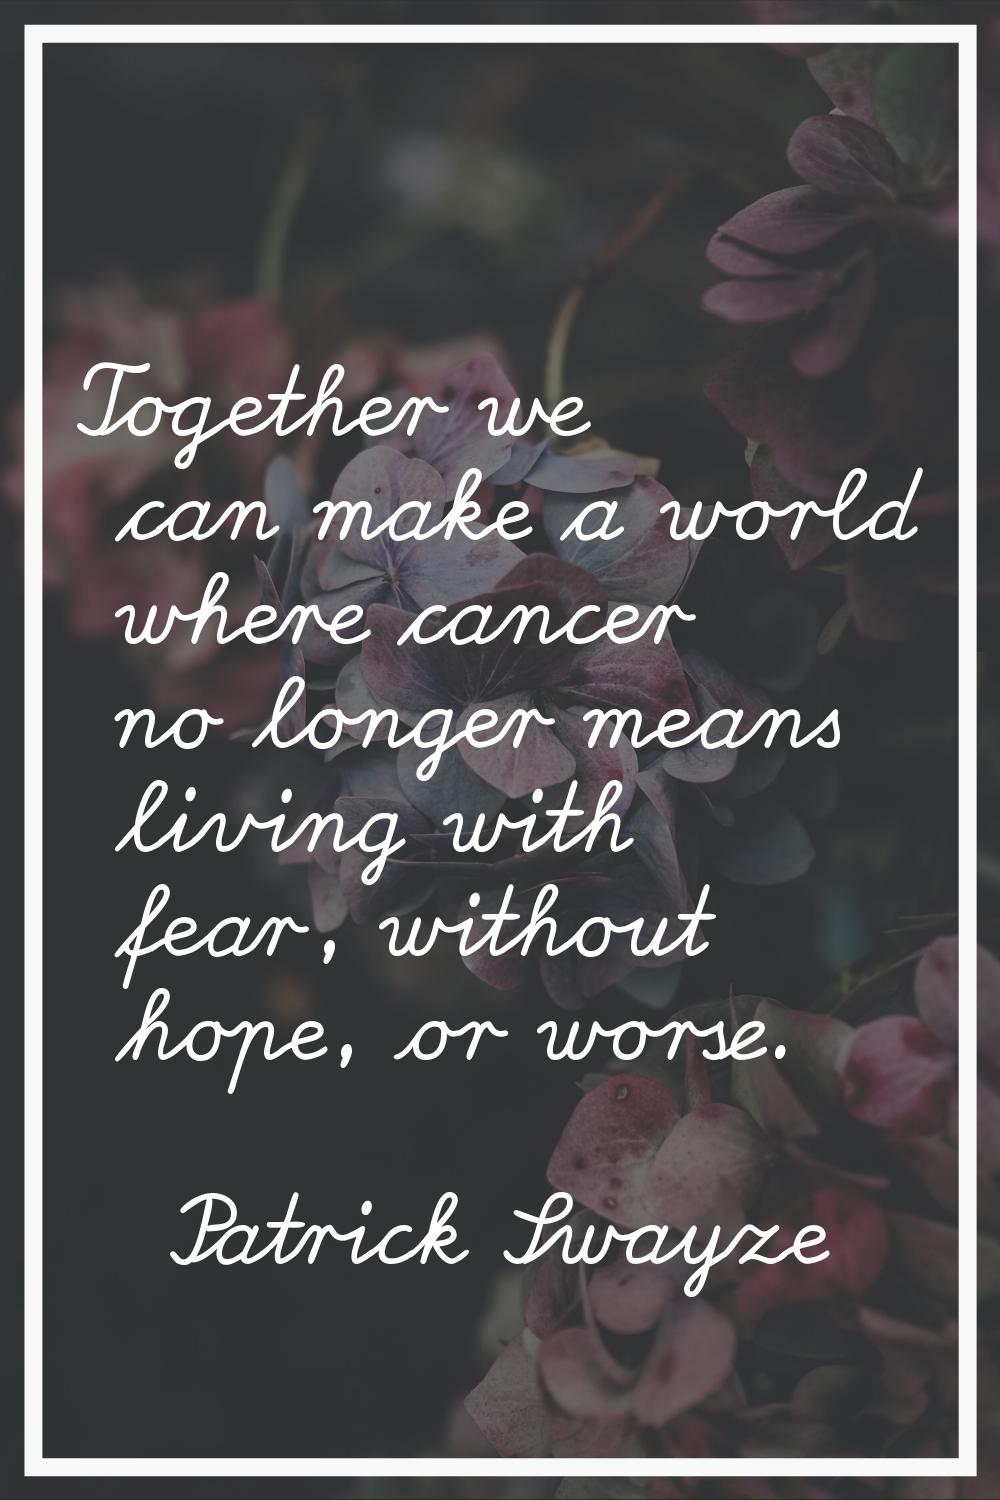 Together we can make a world where cancer no longer means living with fear, without hope, or worse.